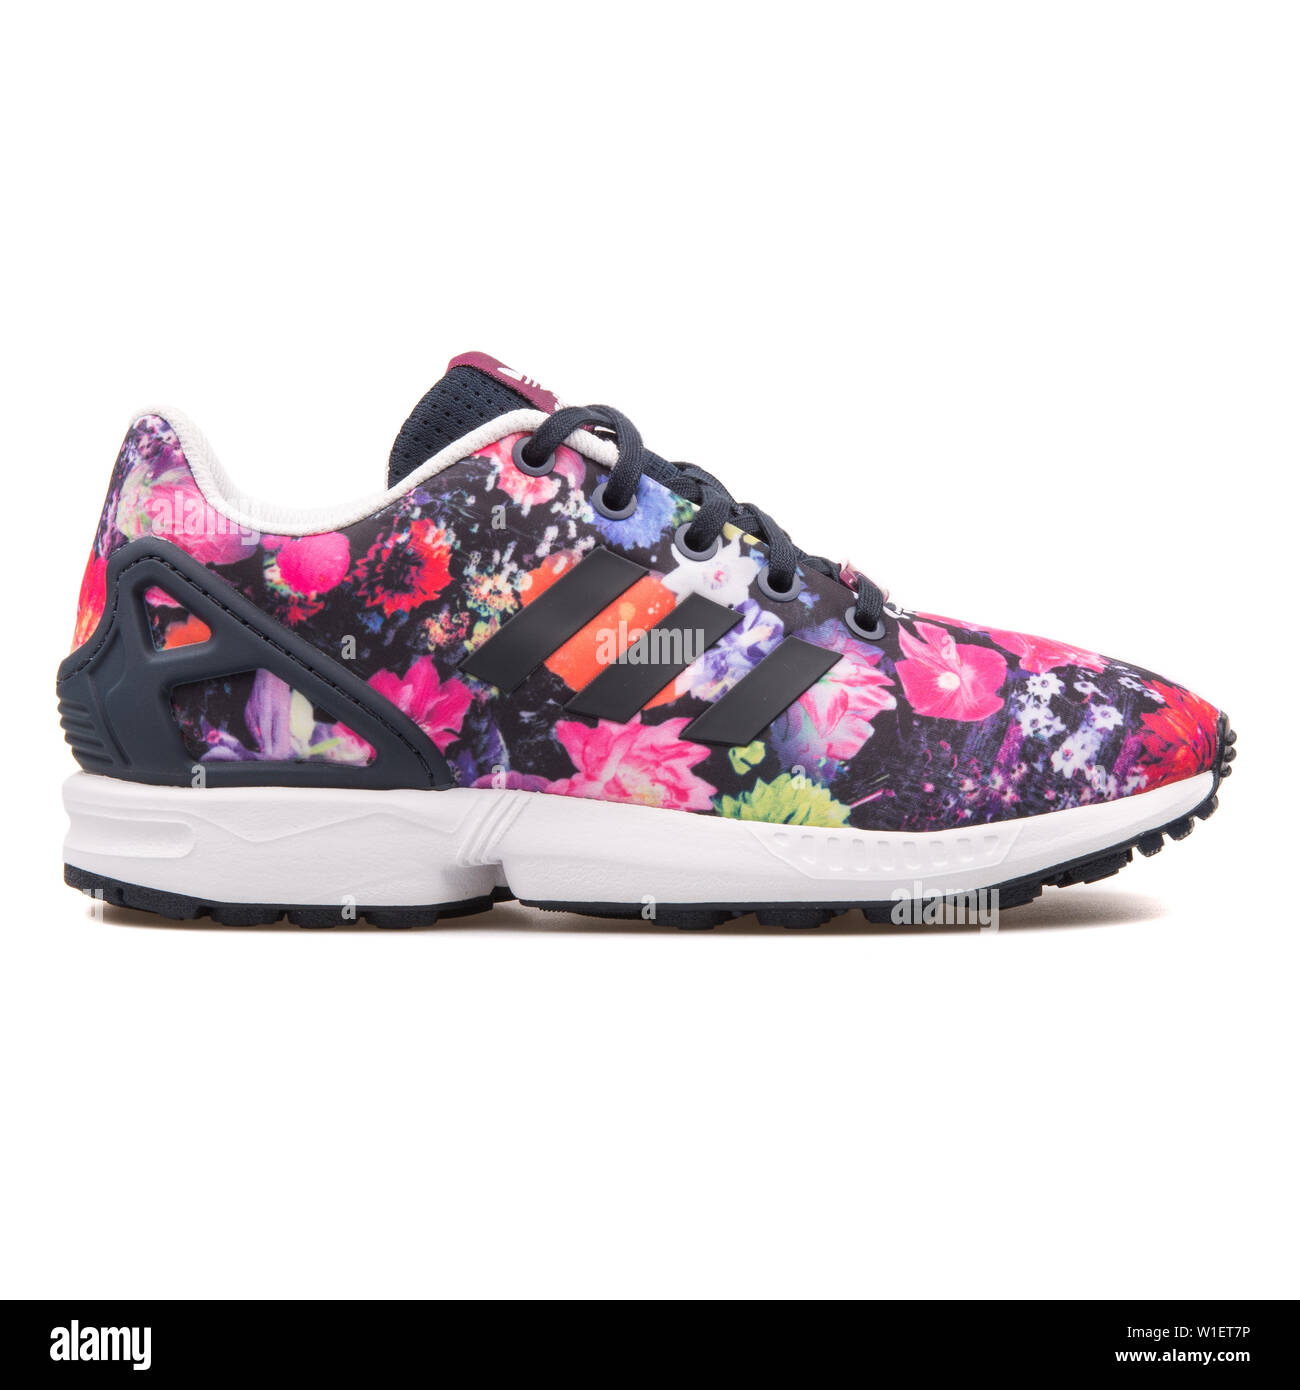 VIENNA, AUSTRIA - AUGUST 10, 2017: Adidas ZX Flux black and multi color  floral print sneaker on white background Stock Photo - Alamy